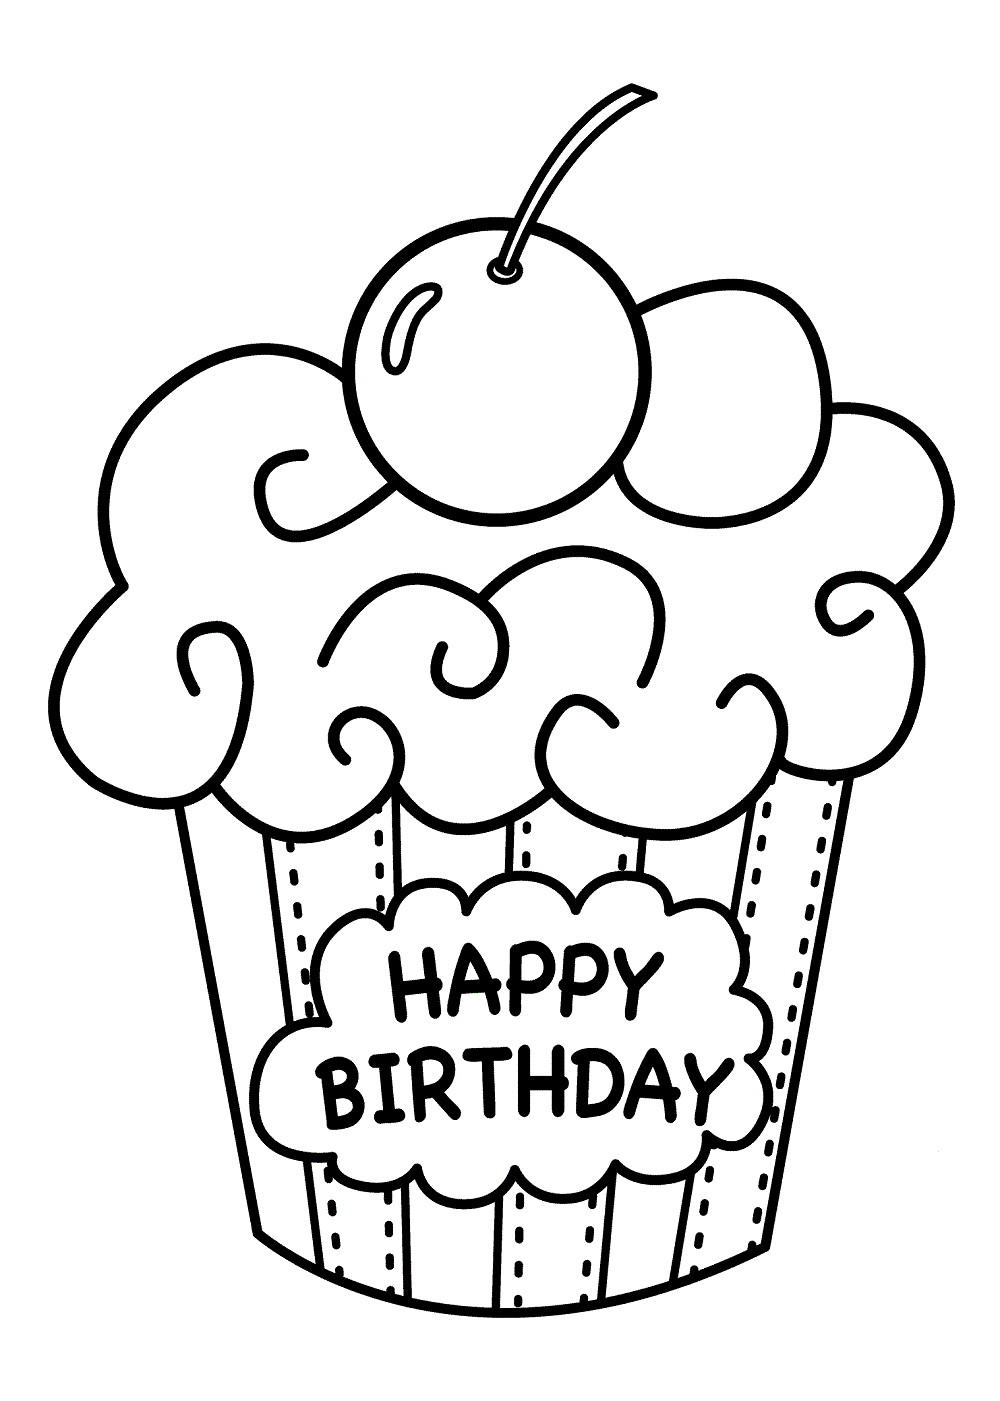 Happy Birthday Girl Coloring Pages
 25 Free Printable Happy Birthday Coloring Pages